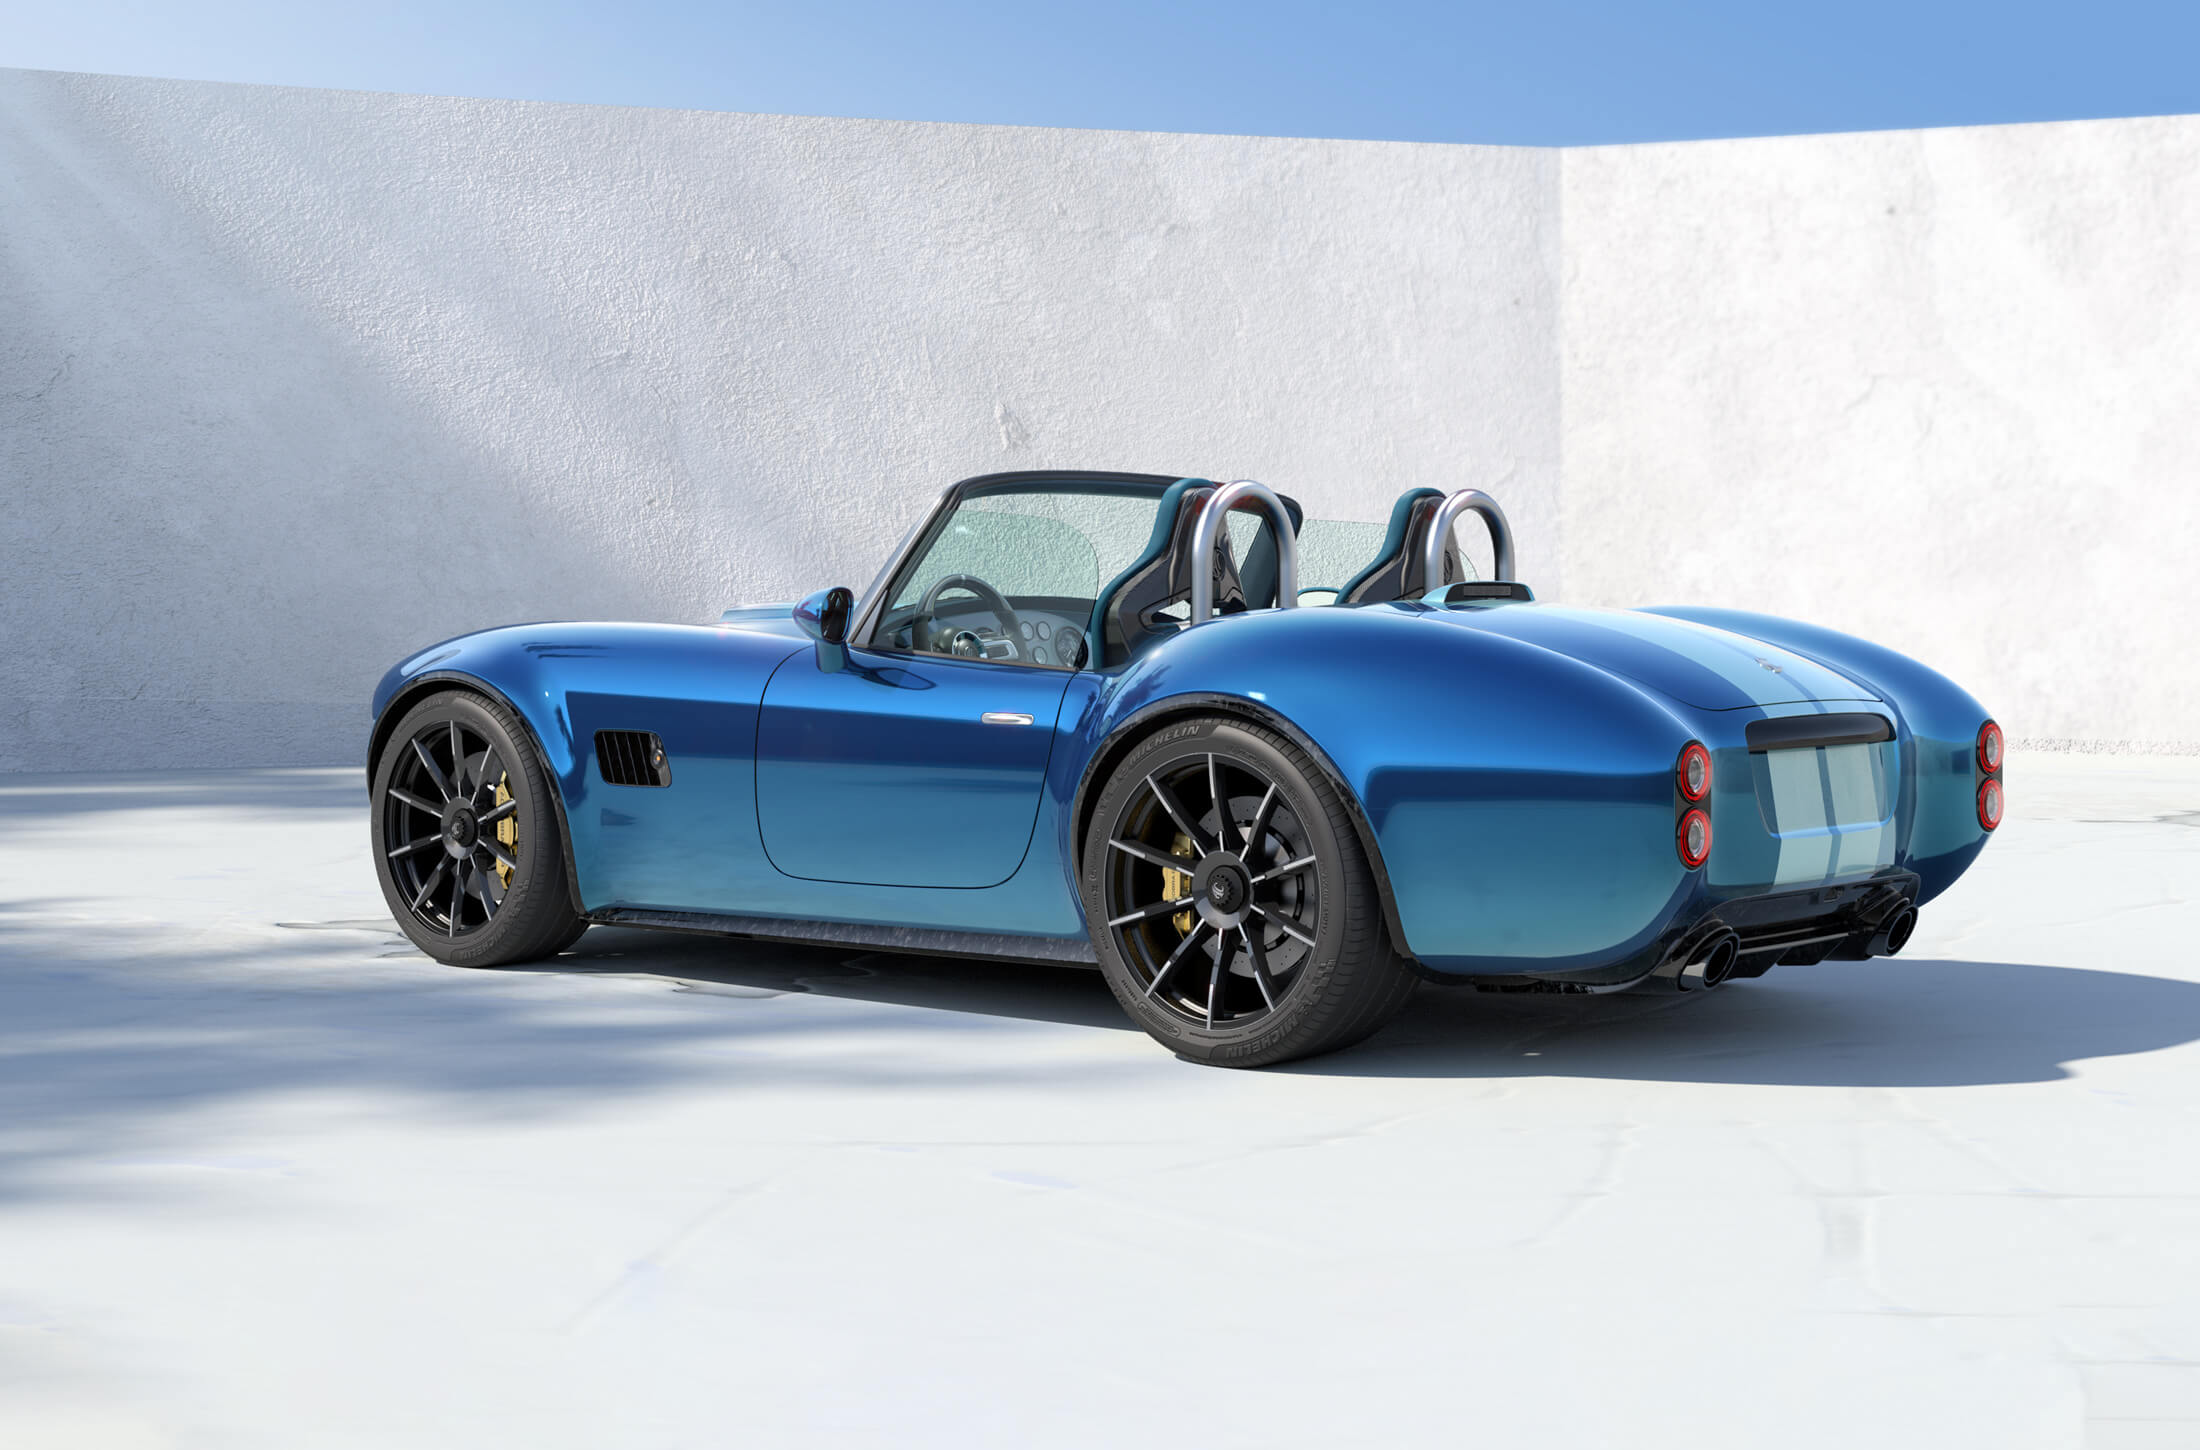 Rear three quarters view of the upcoming AC Cobra GT roadster in blue with white stripes